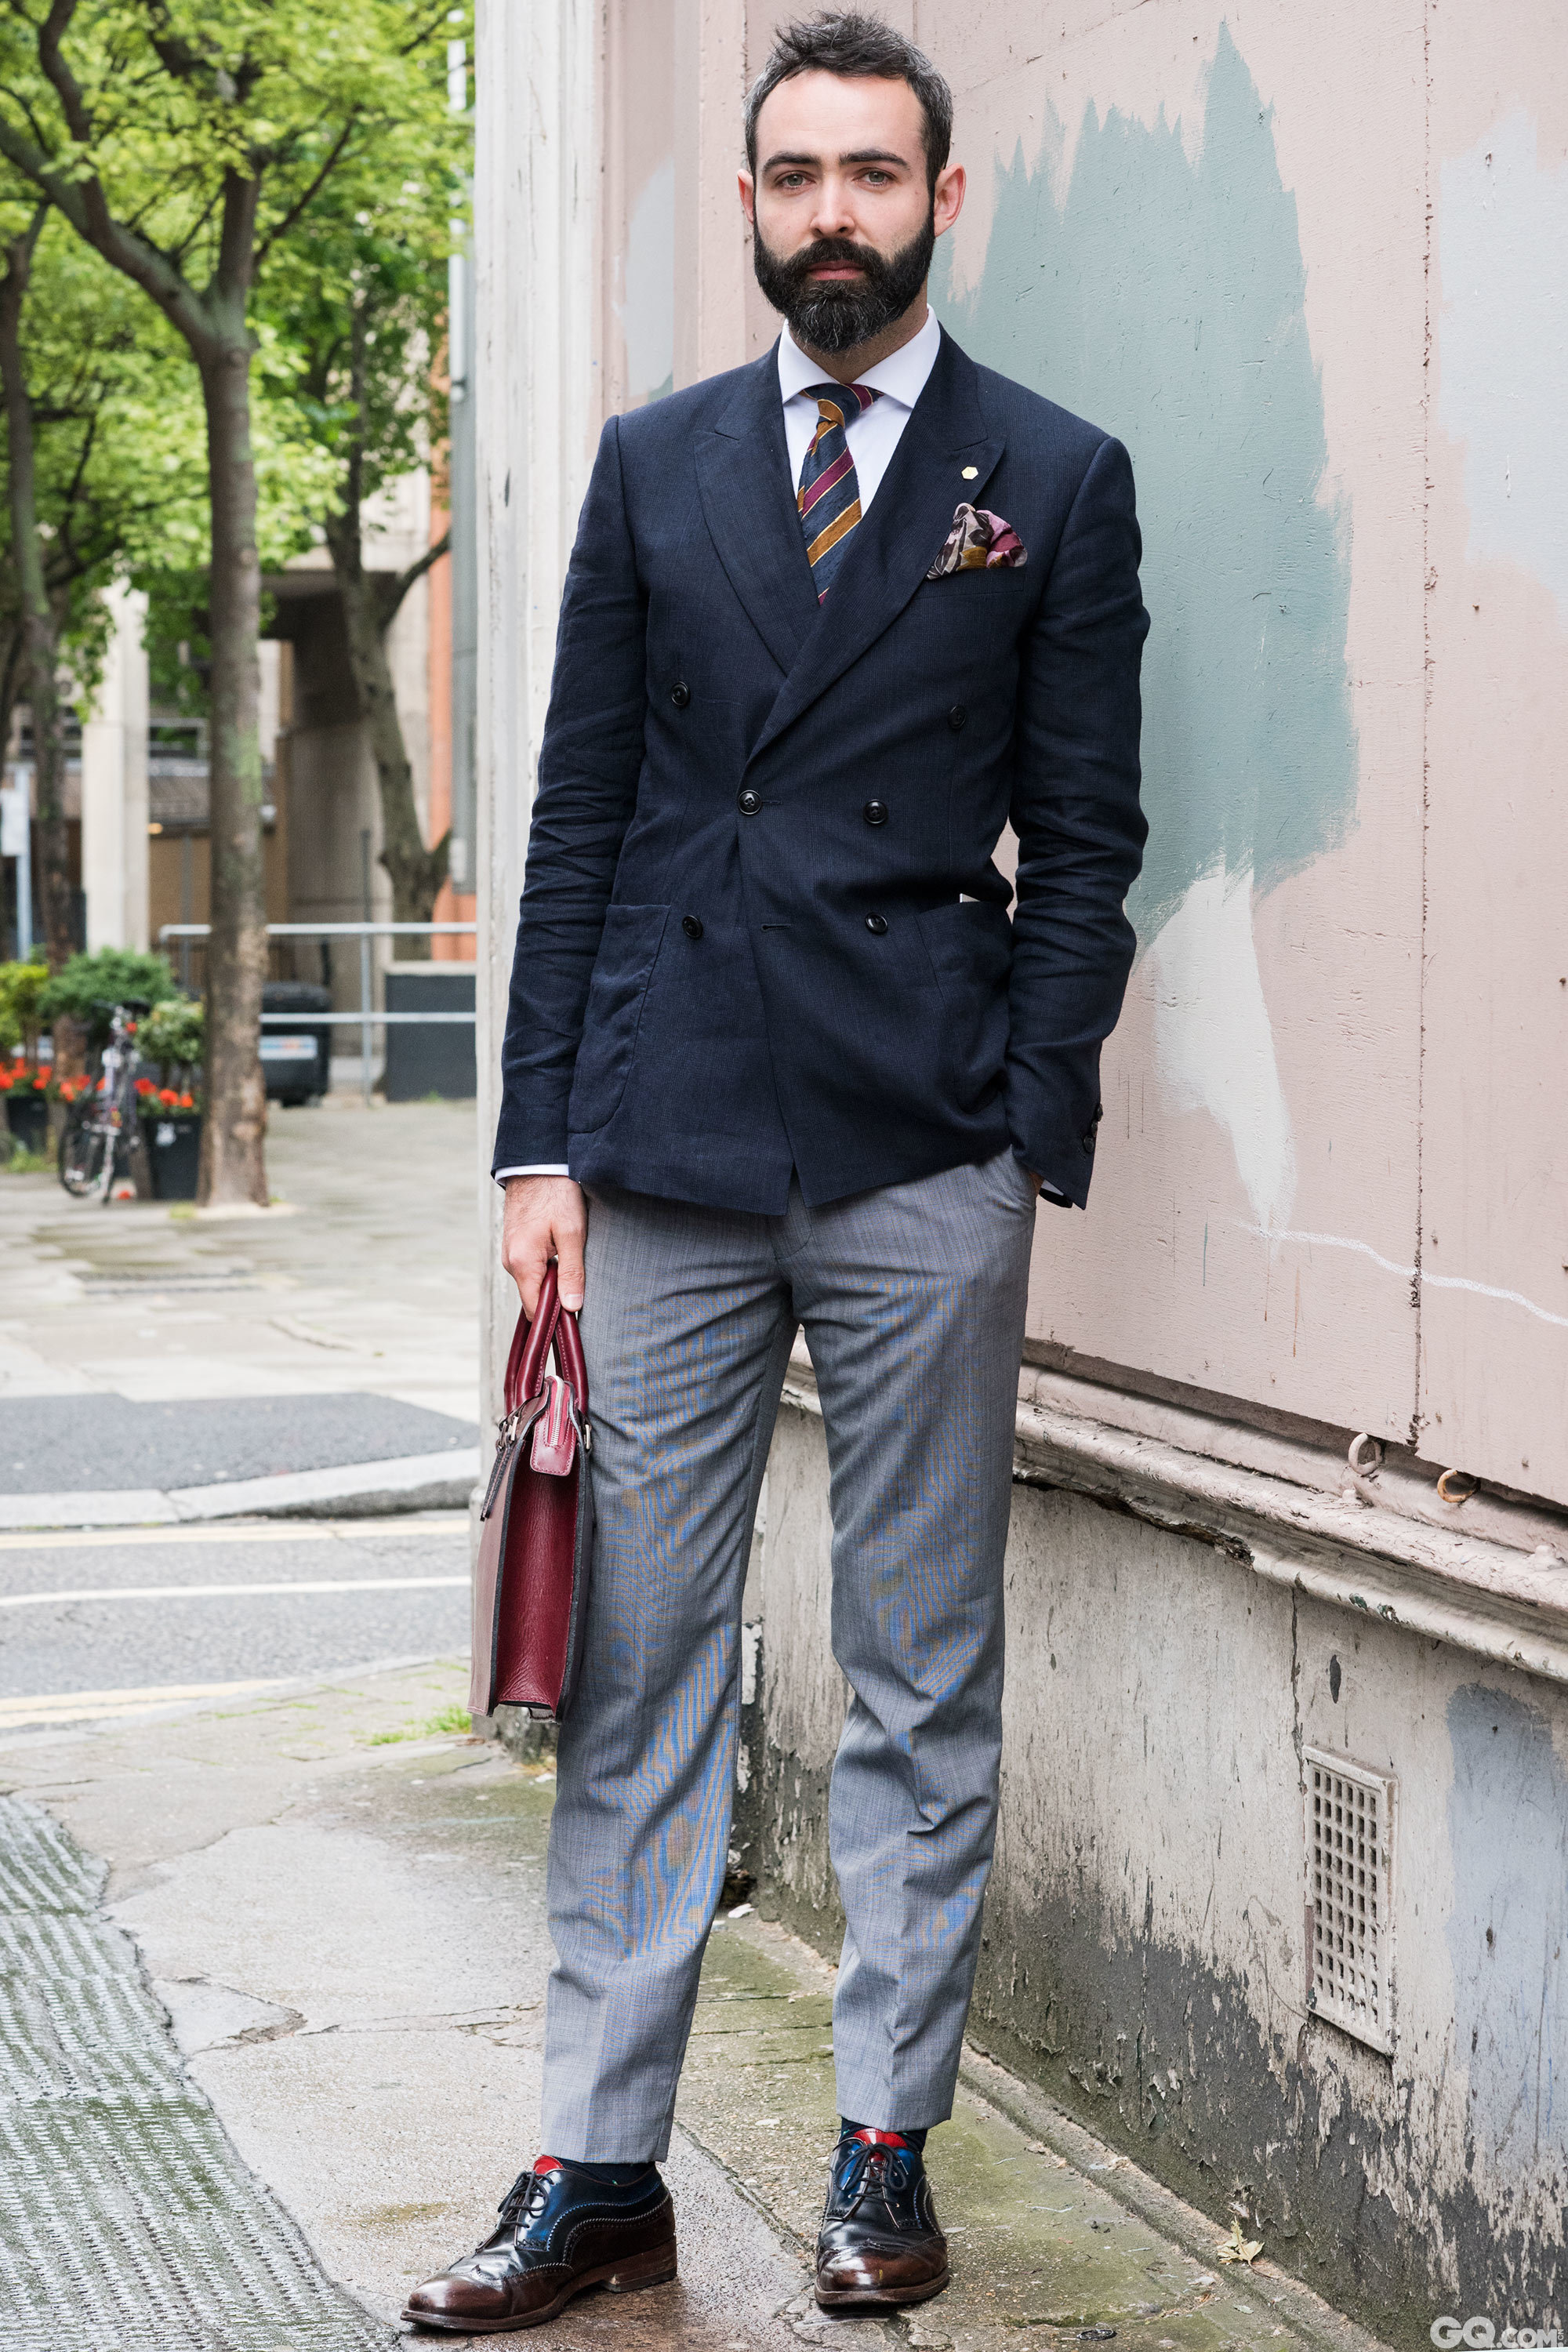 Chris
Jacket: Reiss
Shirt: Color Clock
Tie: Shaun Bordon
Trousers: Paul Smith
Shoes Oliver: Sweeney
Bag: Tosting
Socks: Panterela

Inspiration: All last week I’ve been quite casual but there are a lot brands representing tailored clothing, that’s why it is Monday Chic? 上一周我都穿的很随便，但也会穿很多量身定制的牌子，这就是为什么叫“Monday Chic”。